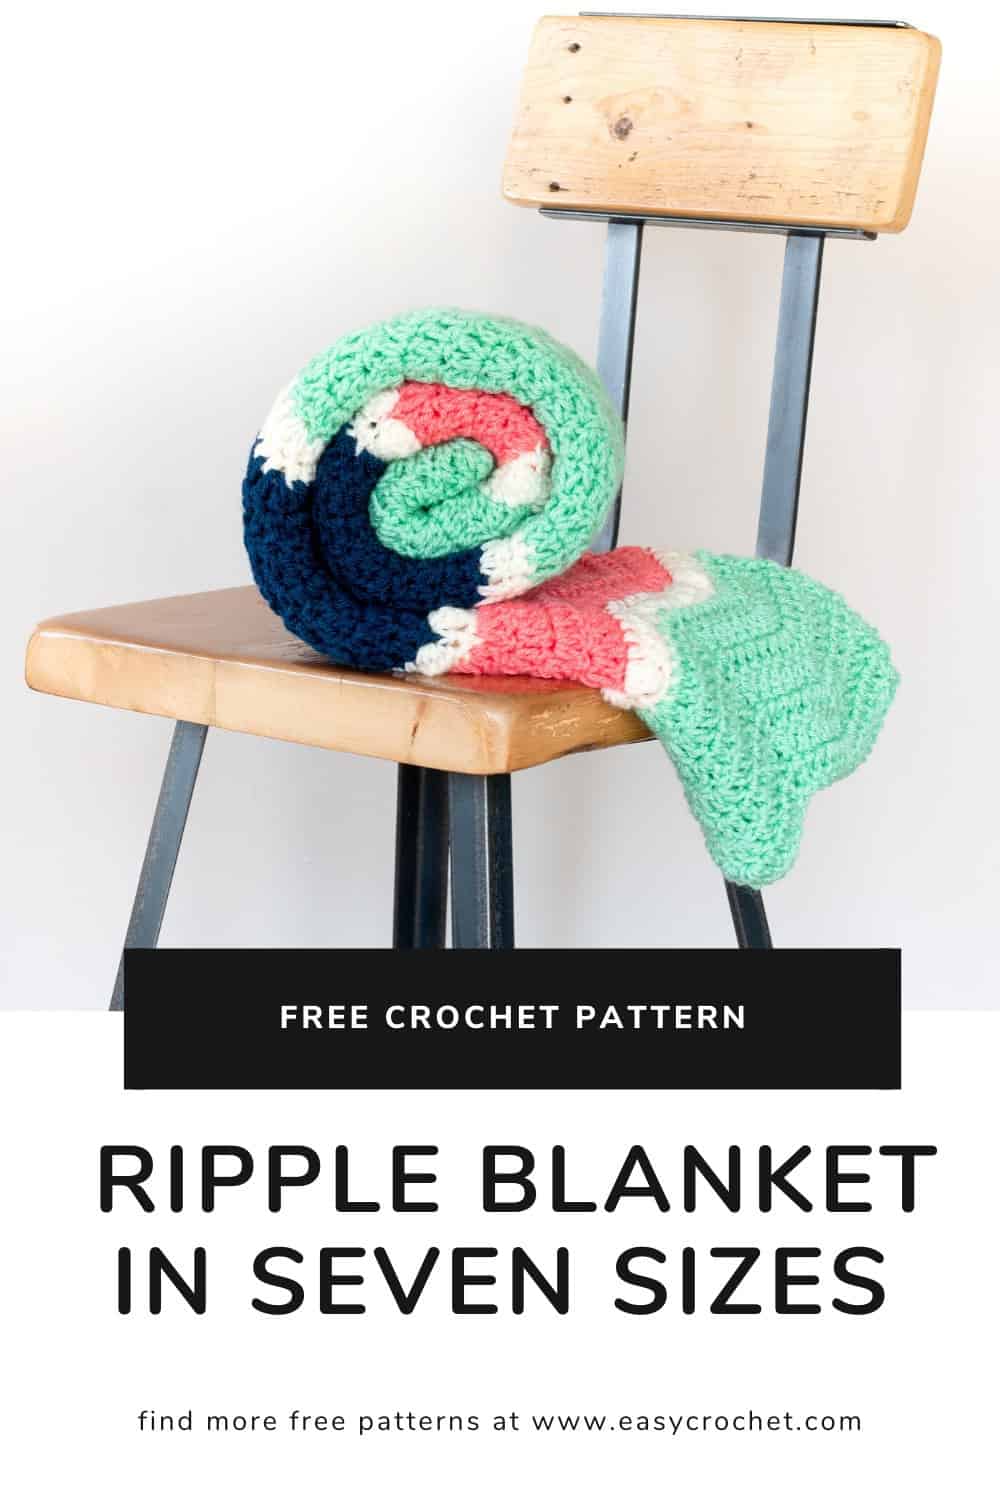 Make this crochet blanket pattern using the double crochet stitch! Free pattern from easycrochet.com. Find this design and many more. #crochetblanket #easycrochet #freecrochetpattern via @easycrochetcom